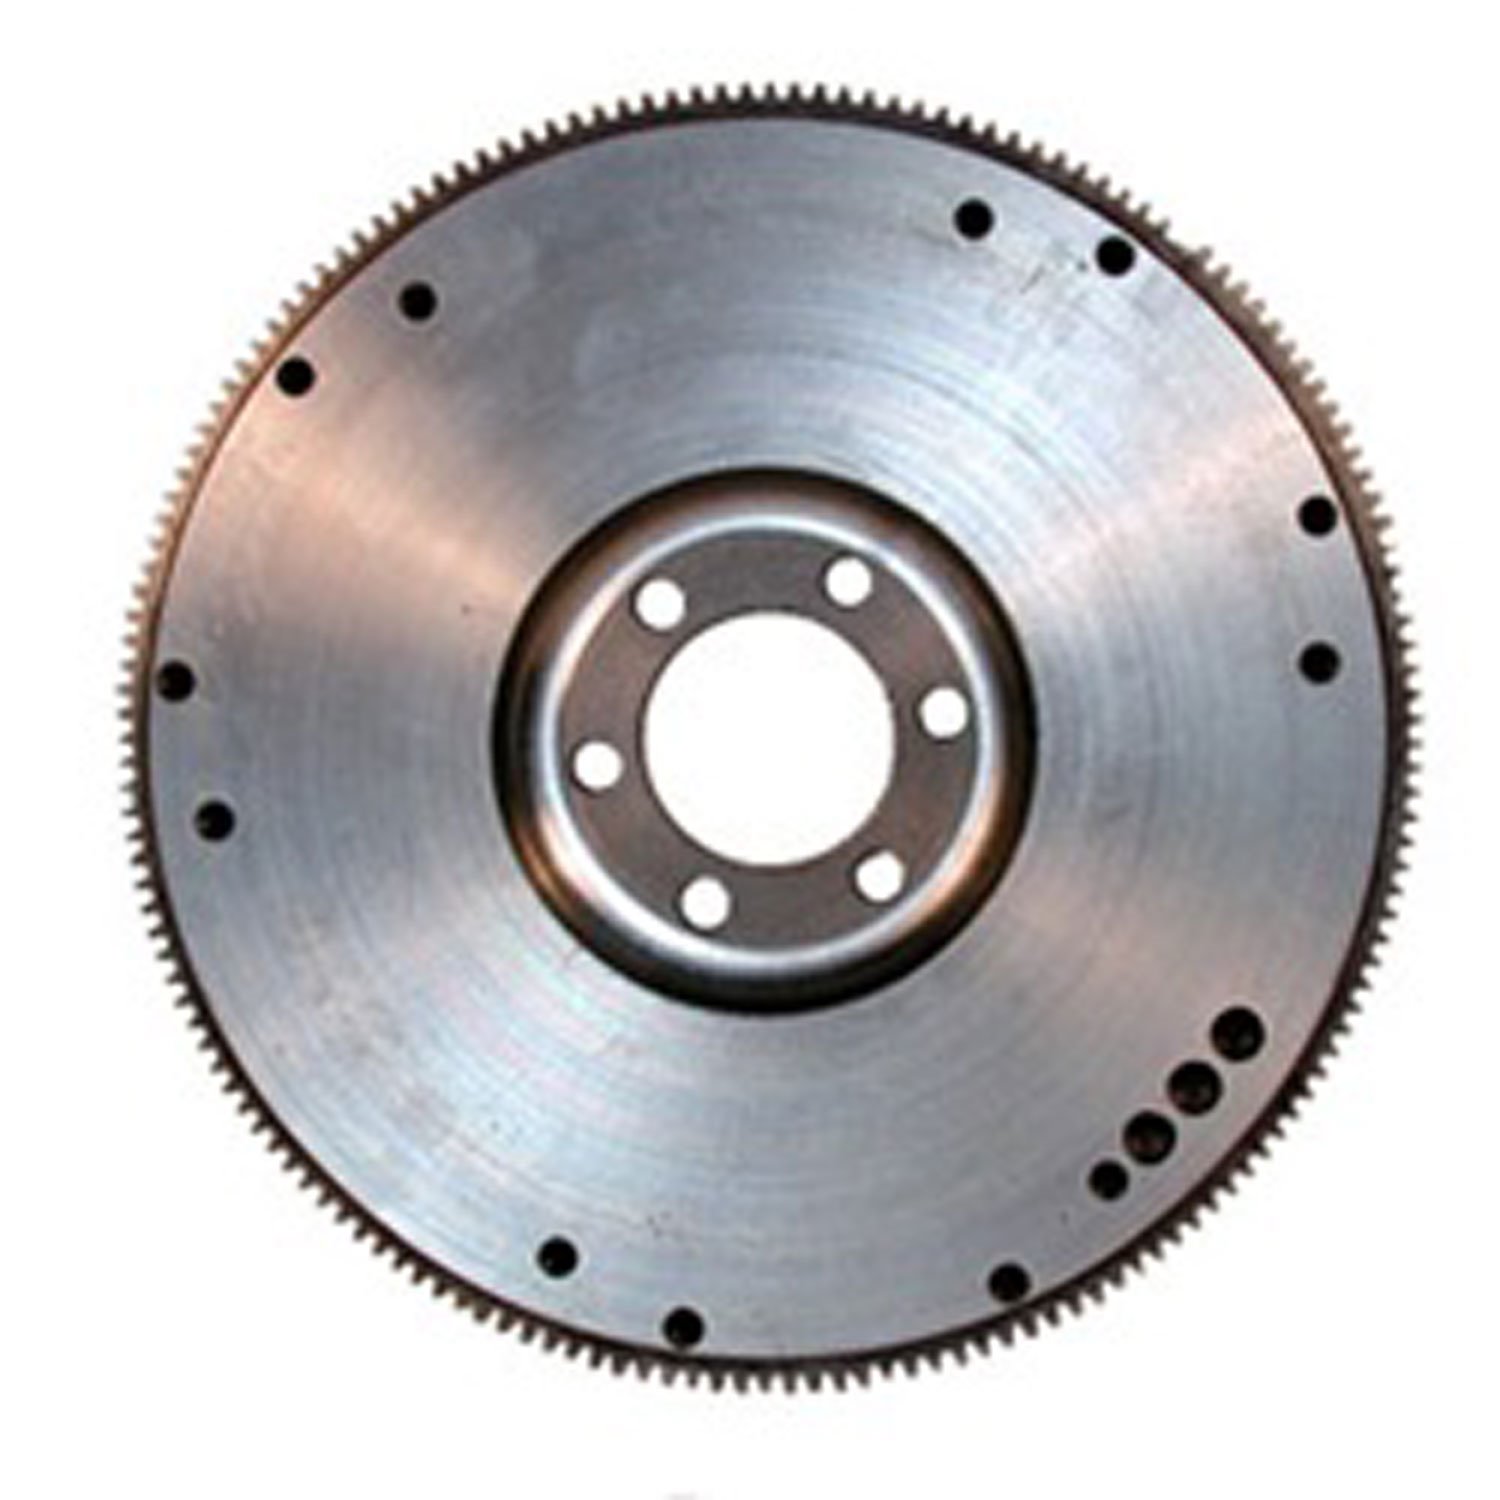 Replacement flywheel from Omix-ADA, Fits 72-79 Jeep CJs with a 4.2 liter 6-cylinder engine and a manual transmission.